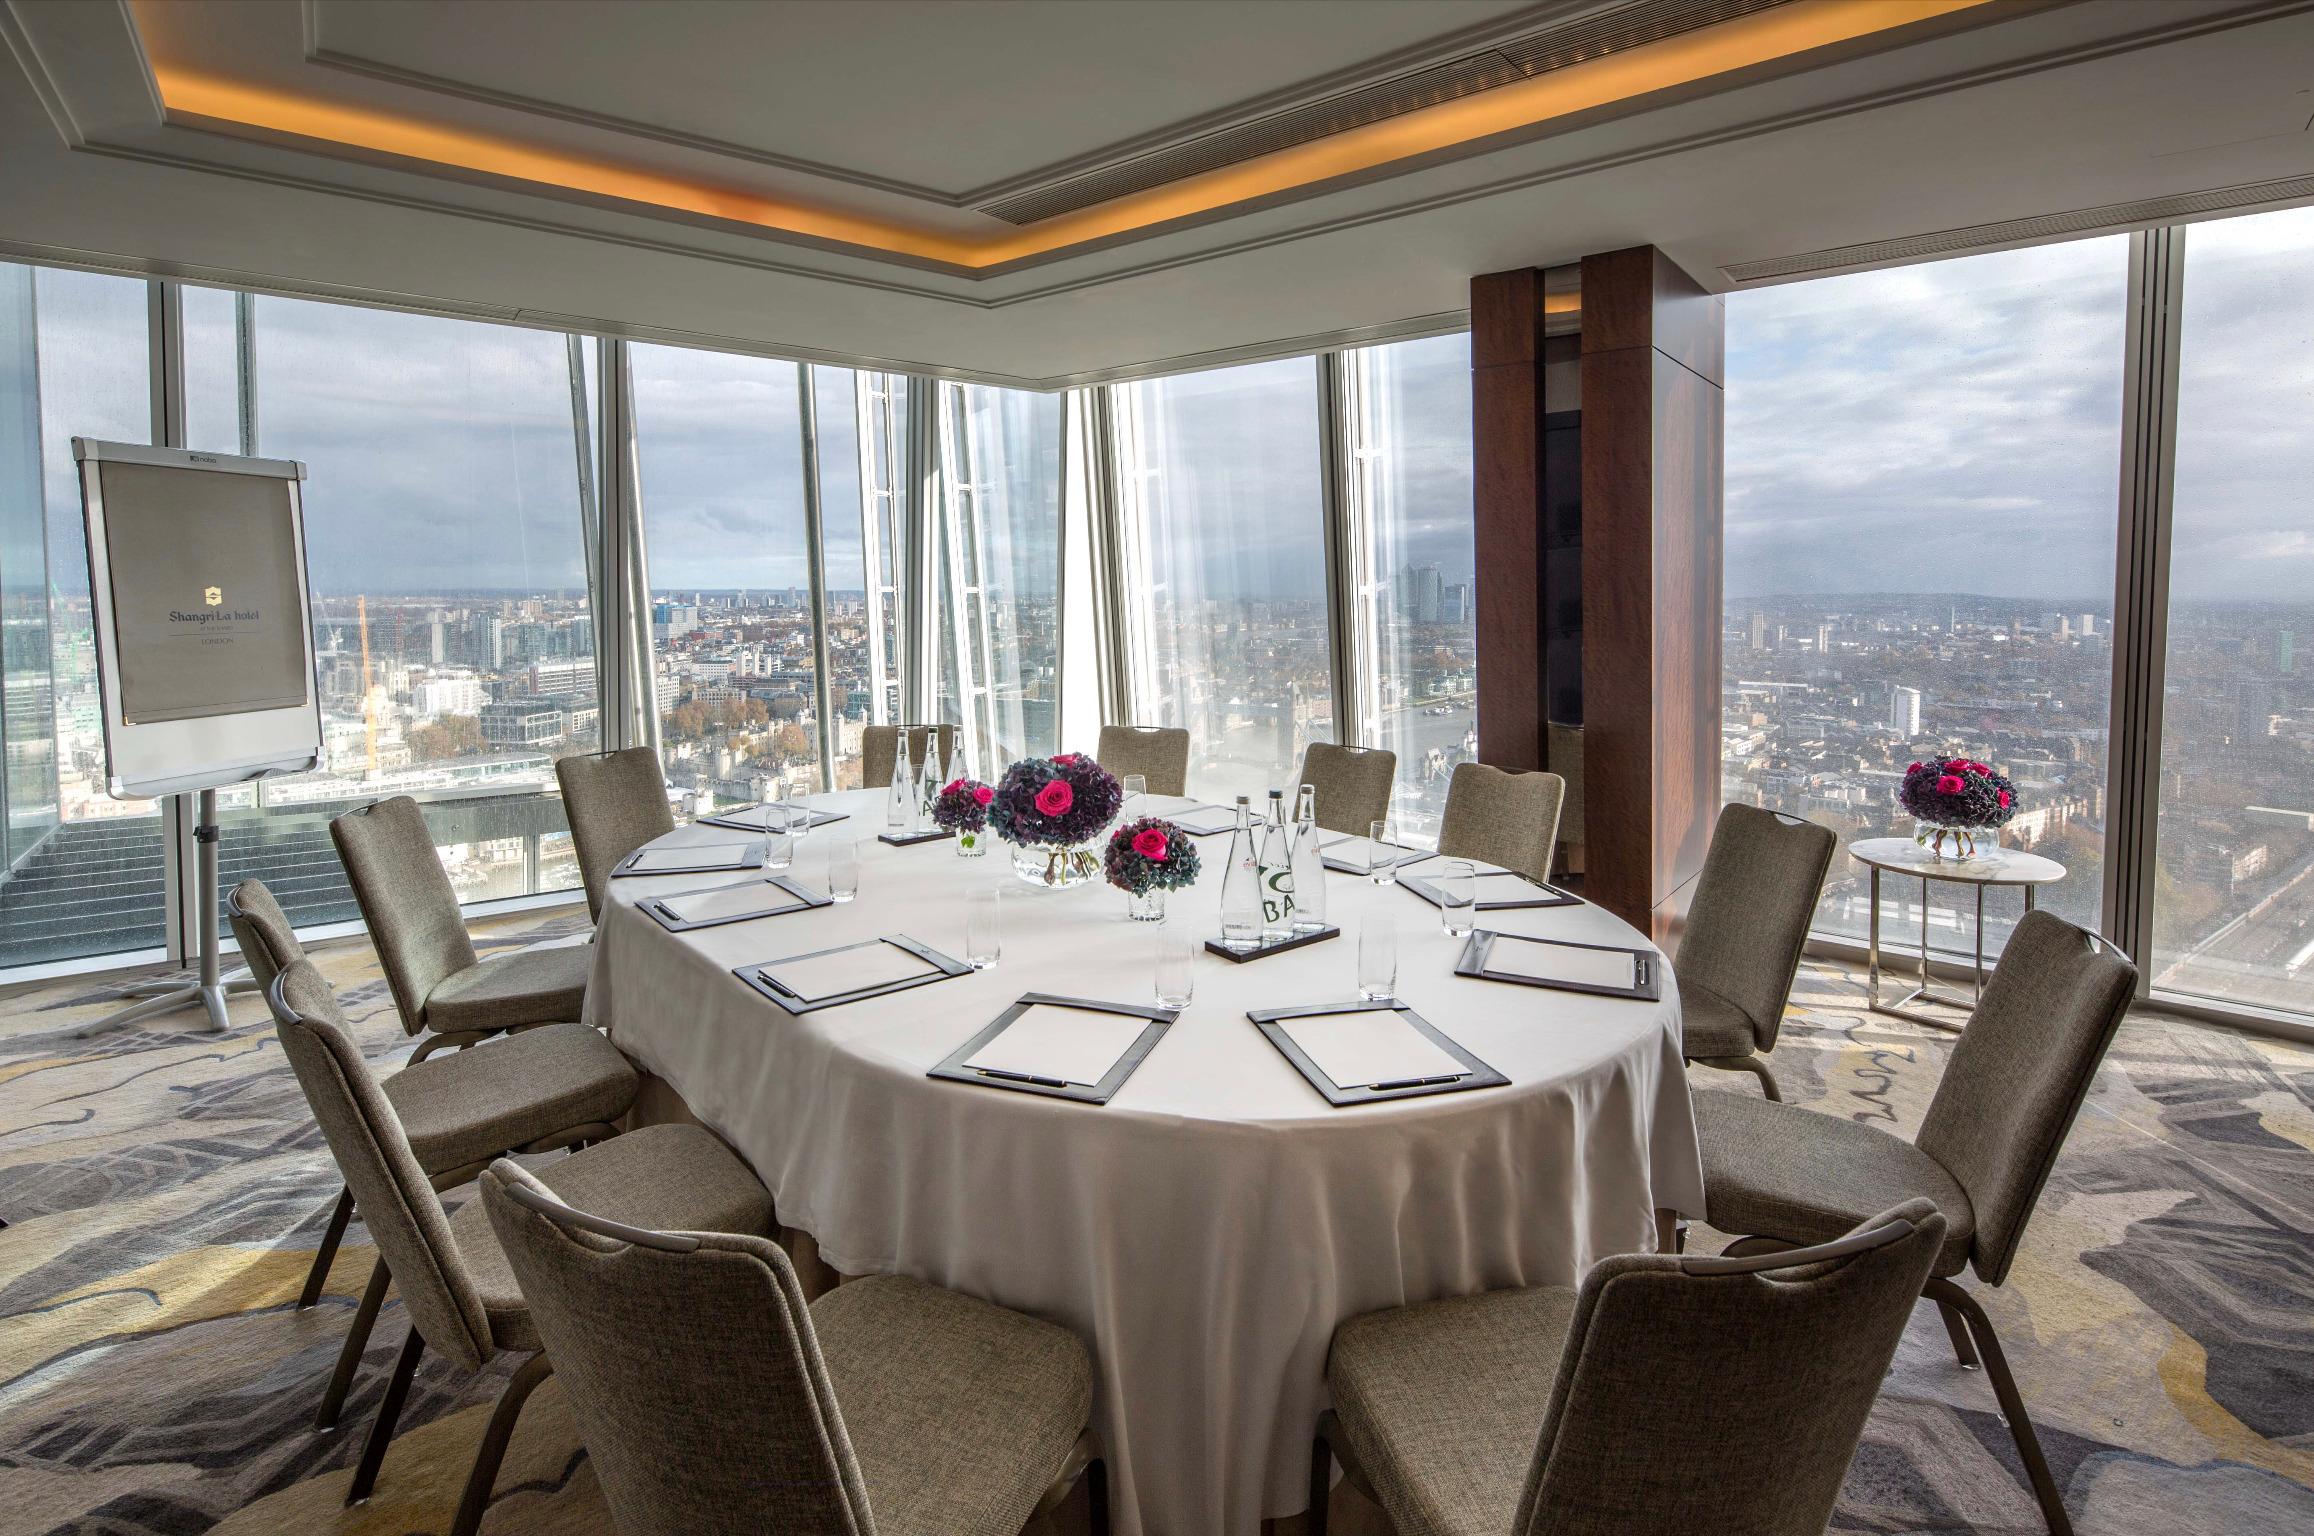 Shangri-la The Shard, London, YI Room (for Exclusive Hire) photo #3